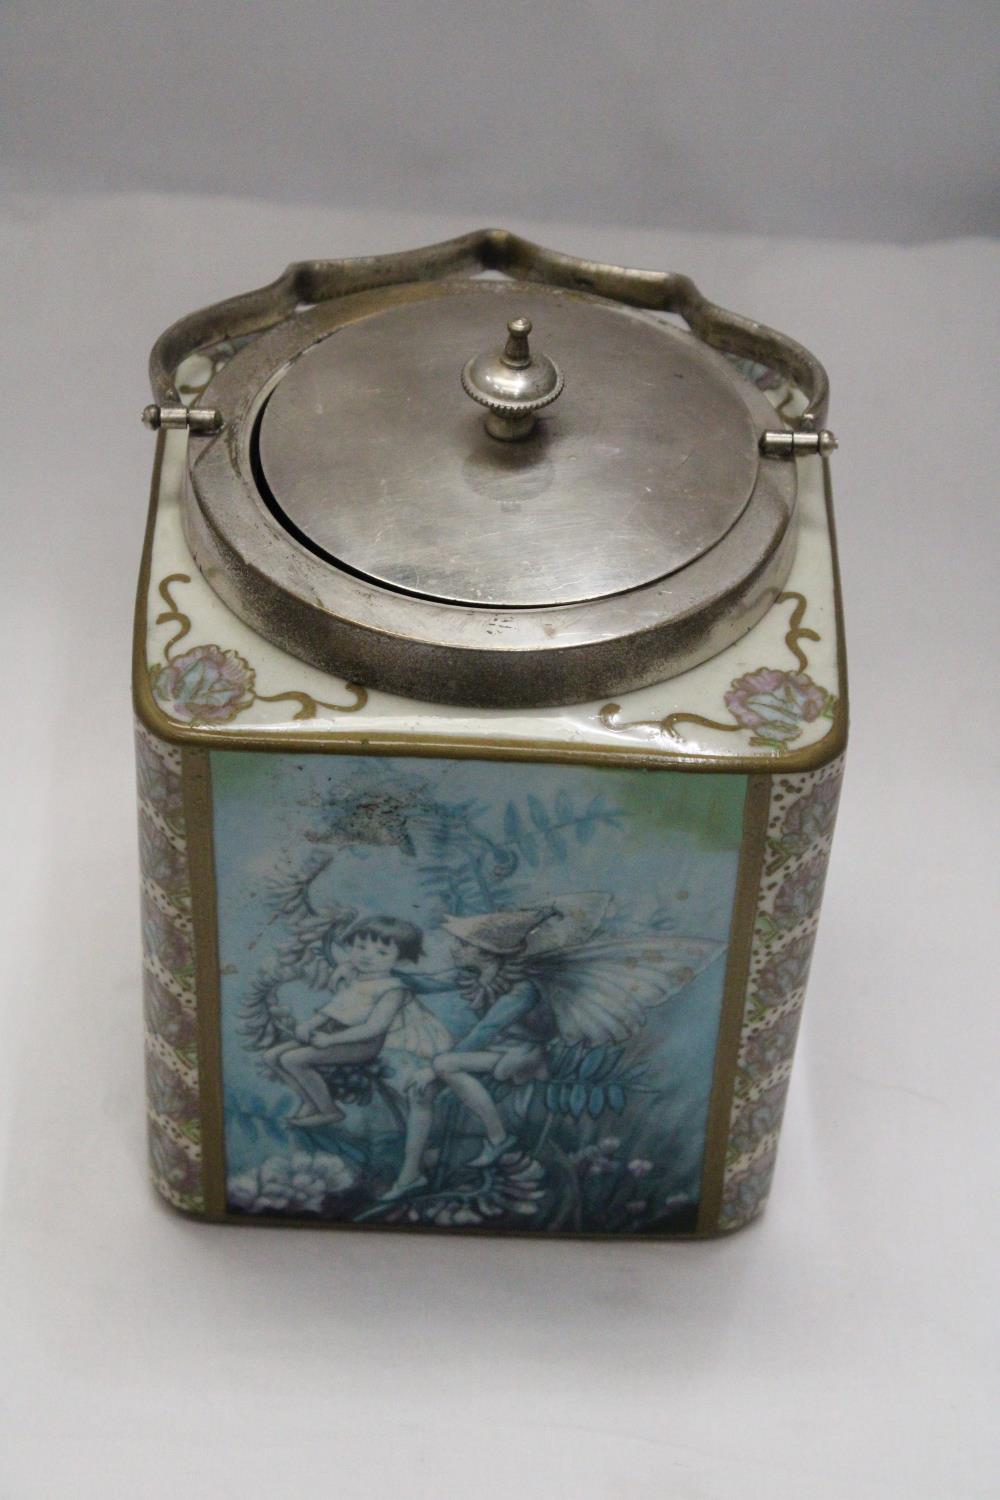 A CERAMIC BISCUIT BARREL DEPICTING FLOWER FAIRIES BY CICELY MARY BARKER - 12 x 6 x 6 INCH